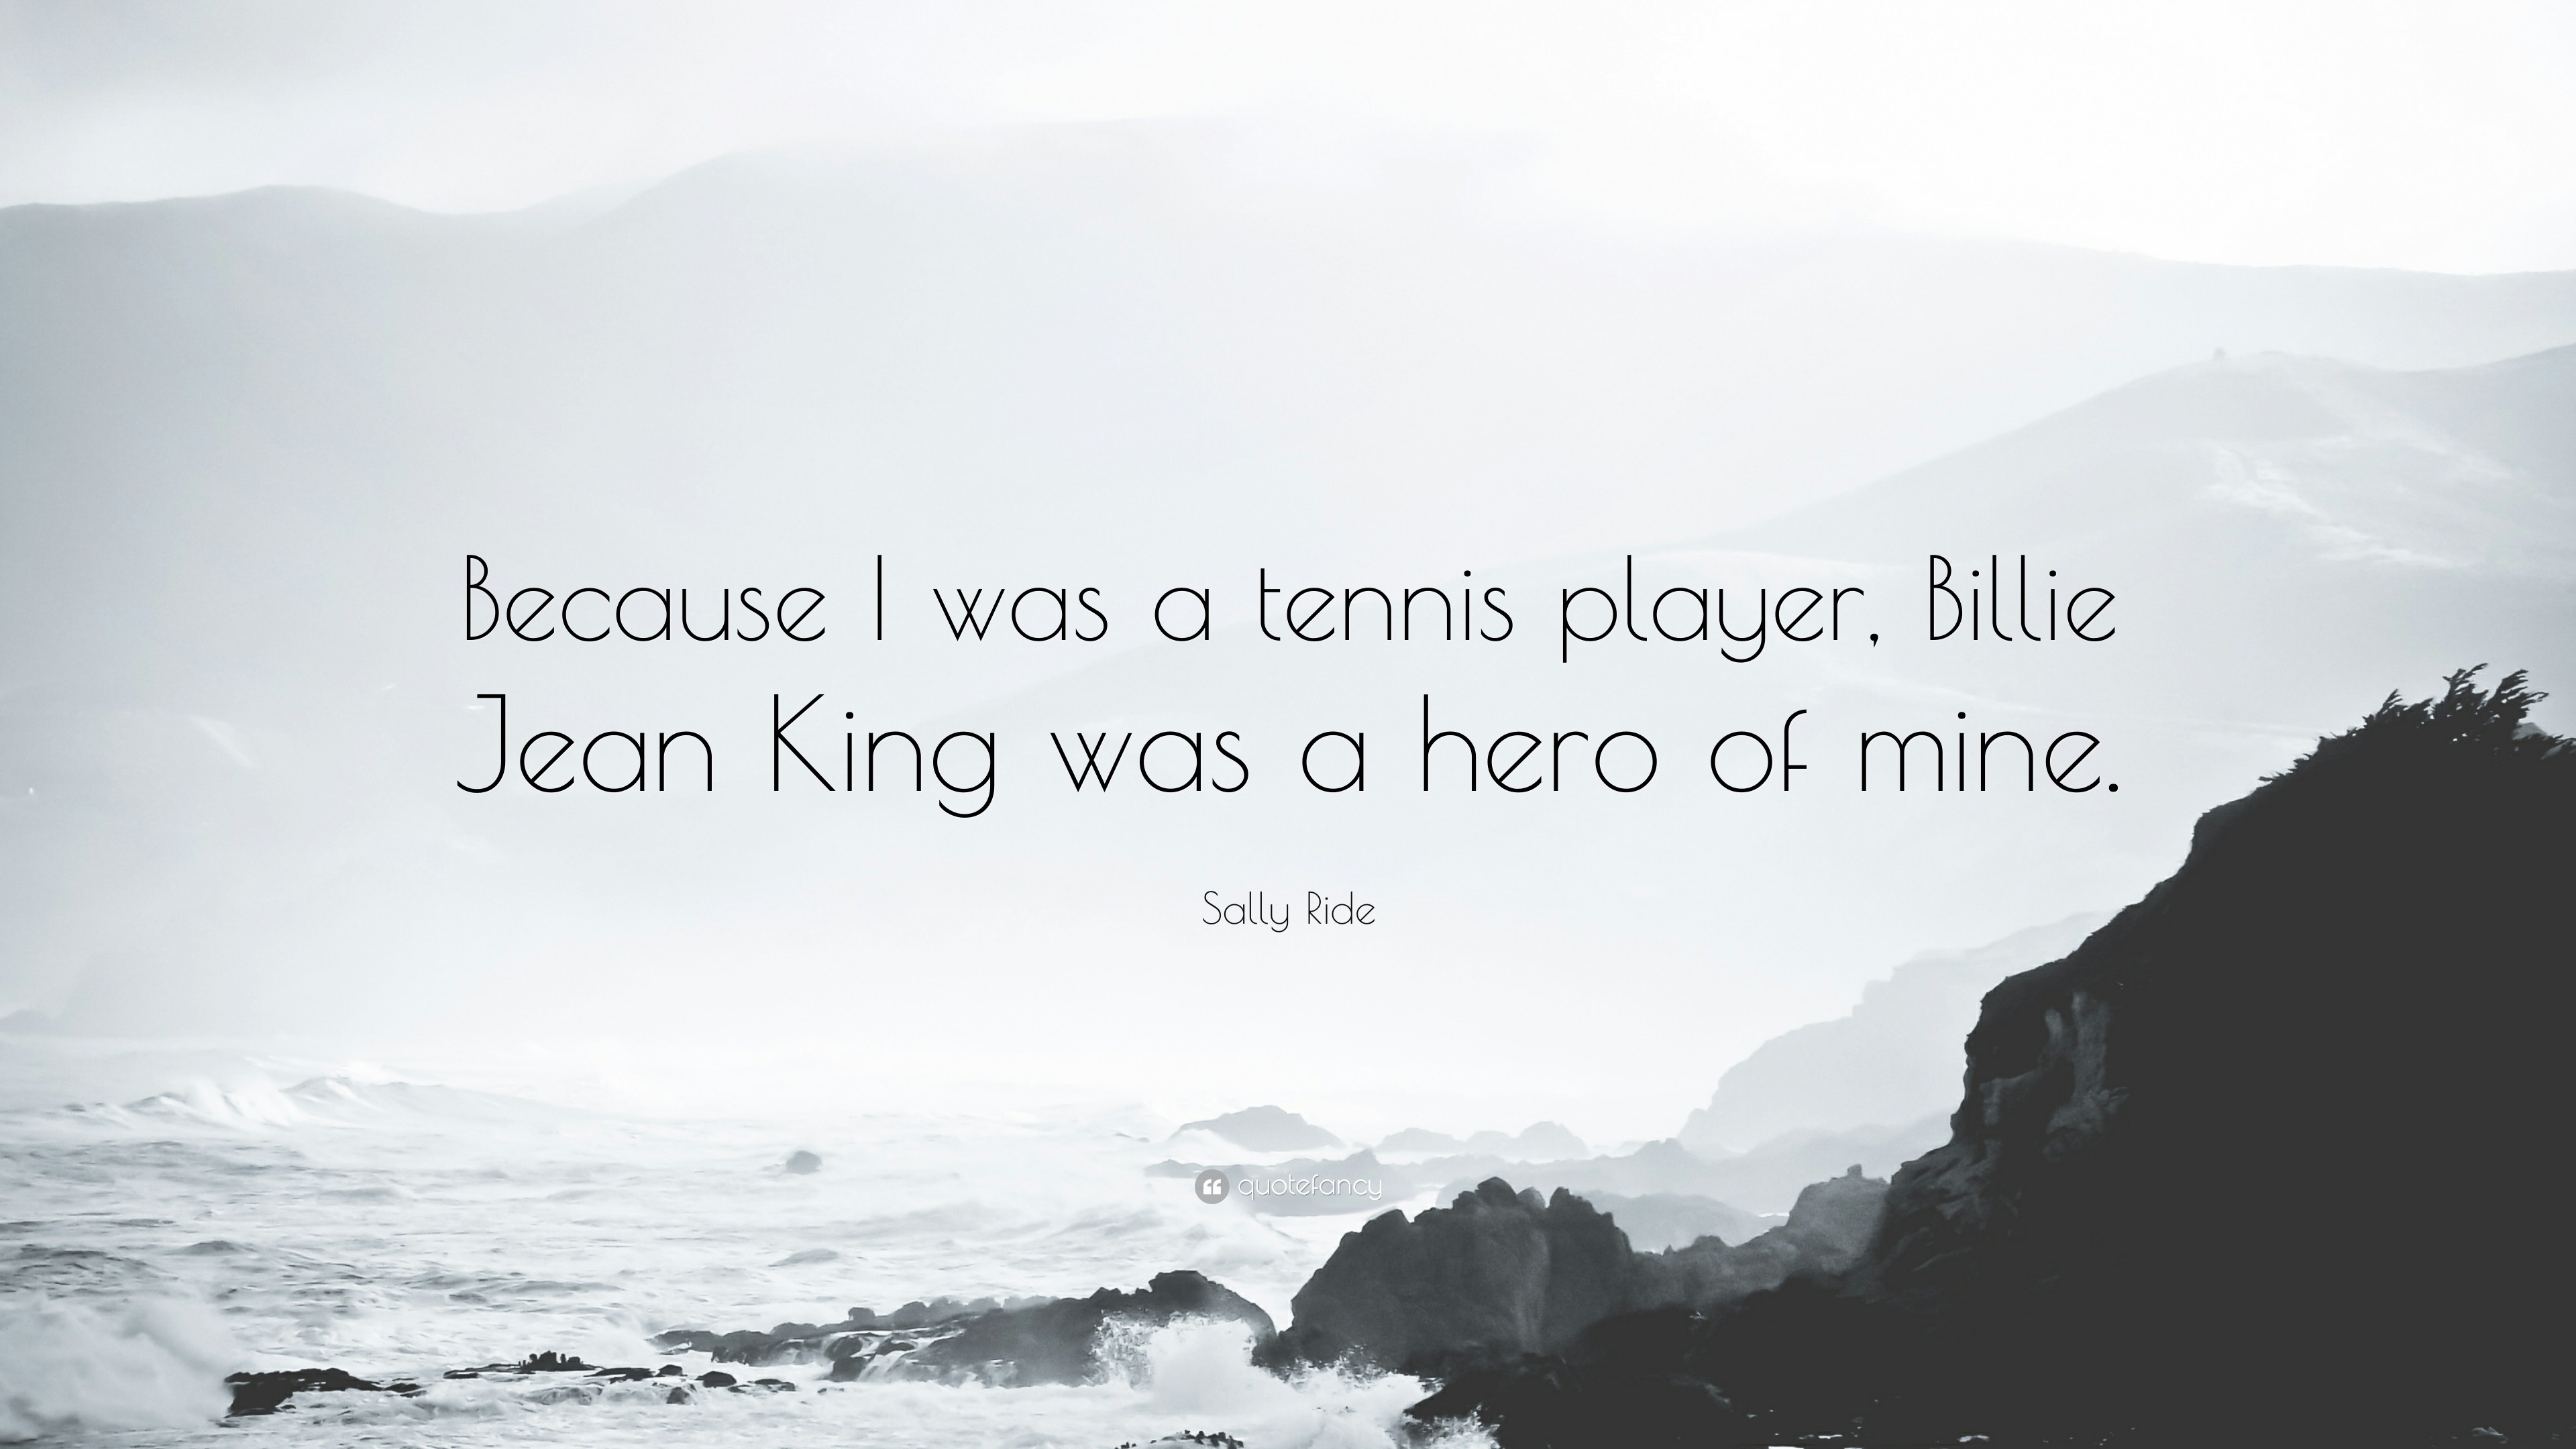 sally ride quotes about space